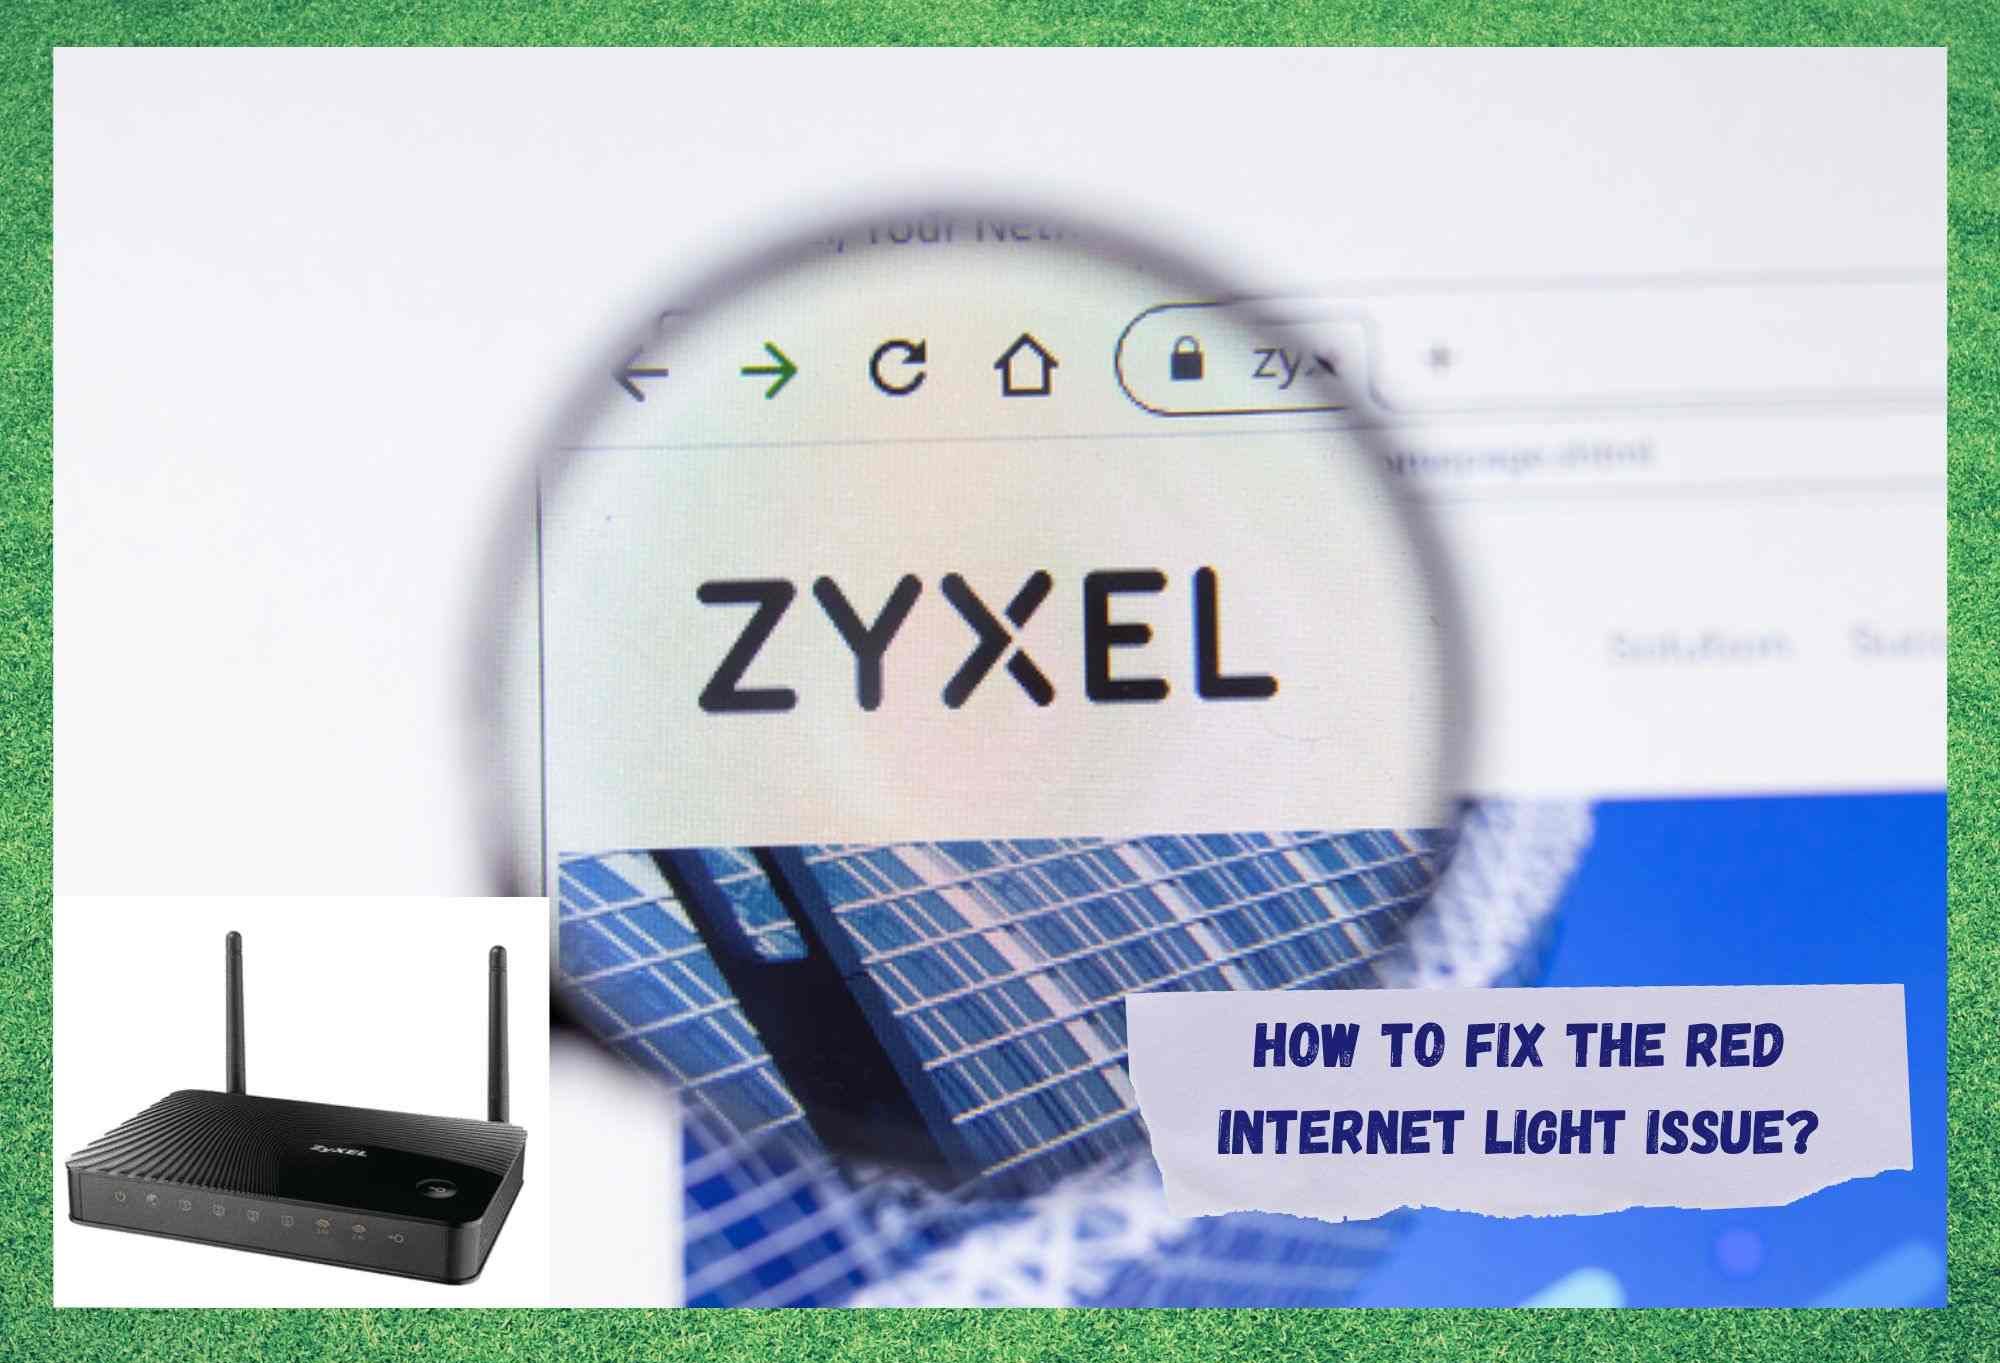 zyxel router red internet light